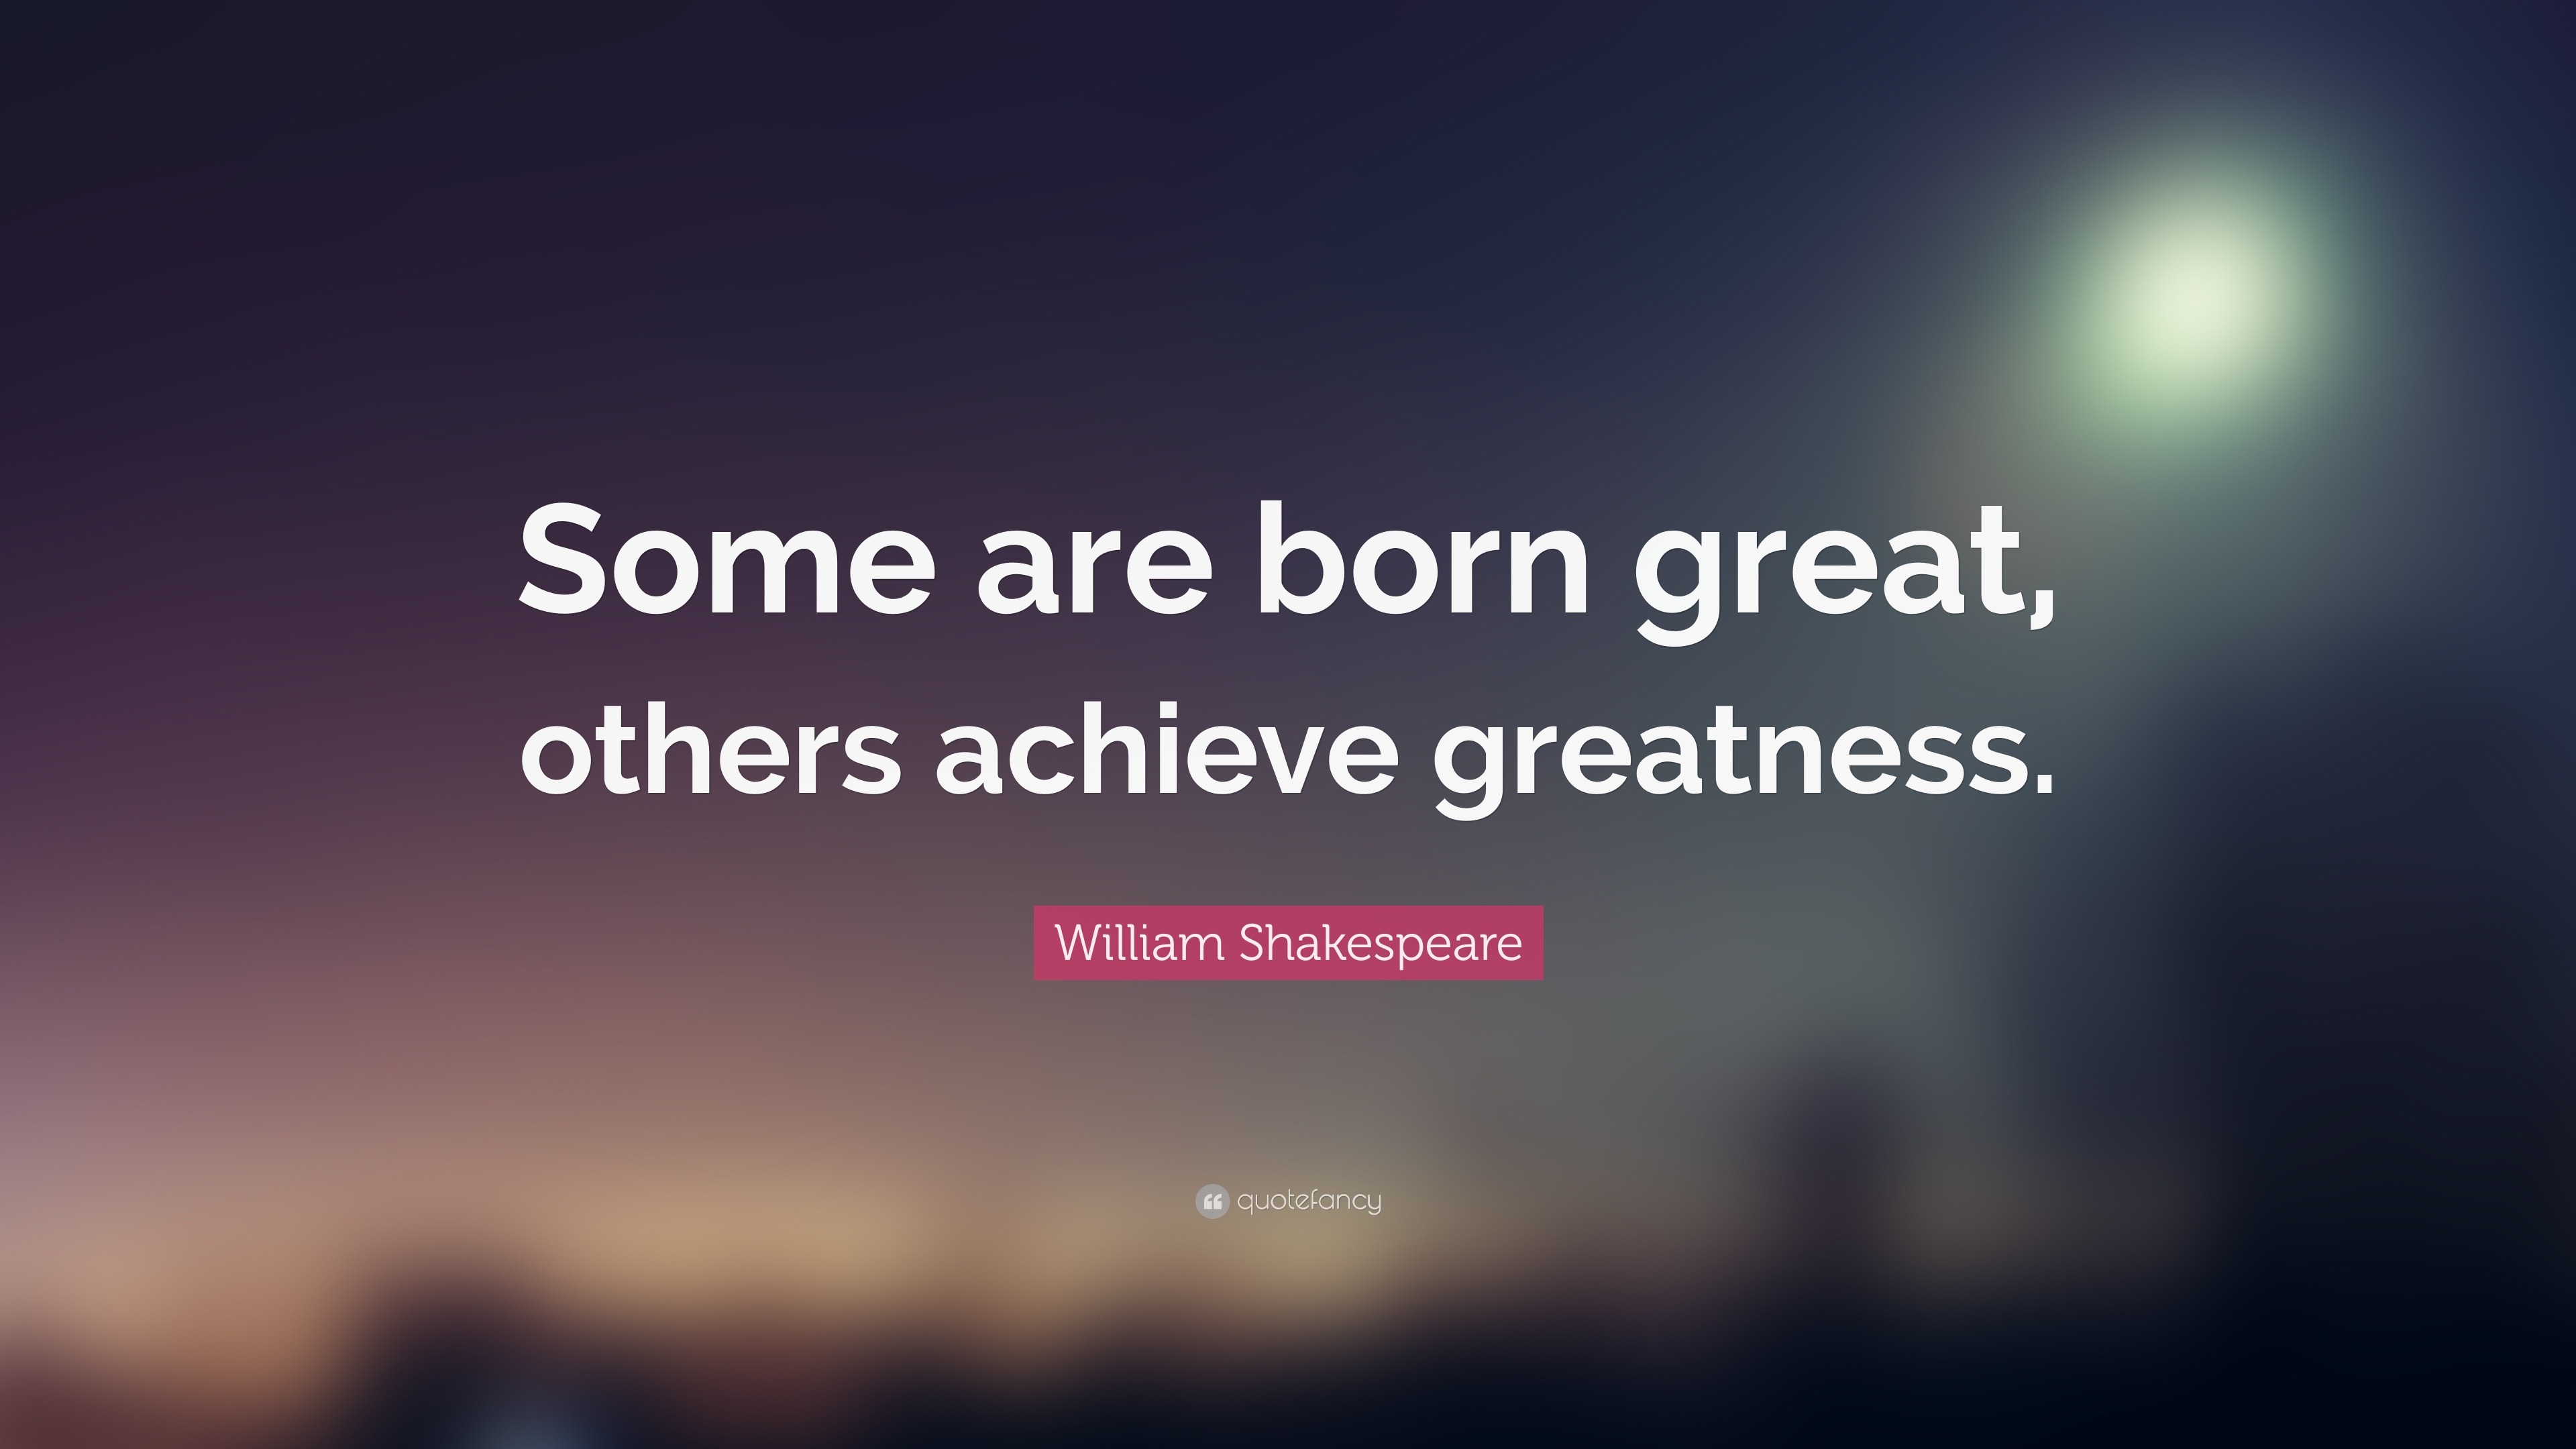 William Shakespeare Quote: "Some are born great, others ...